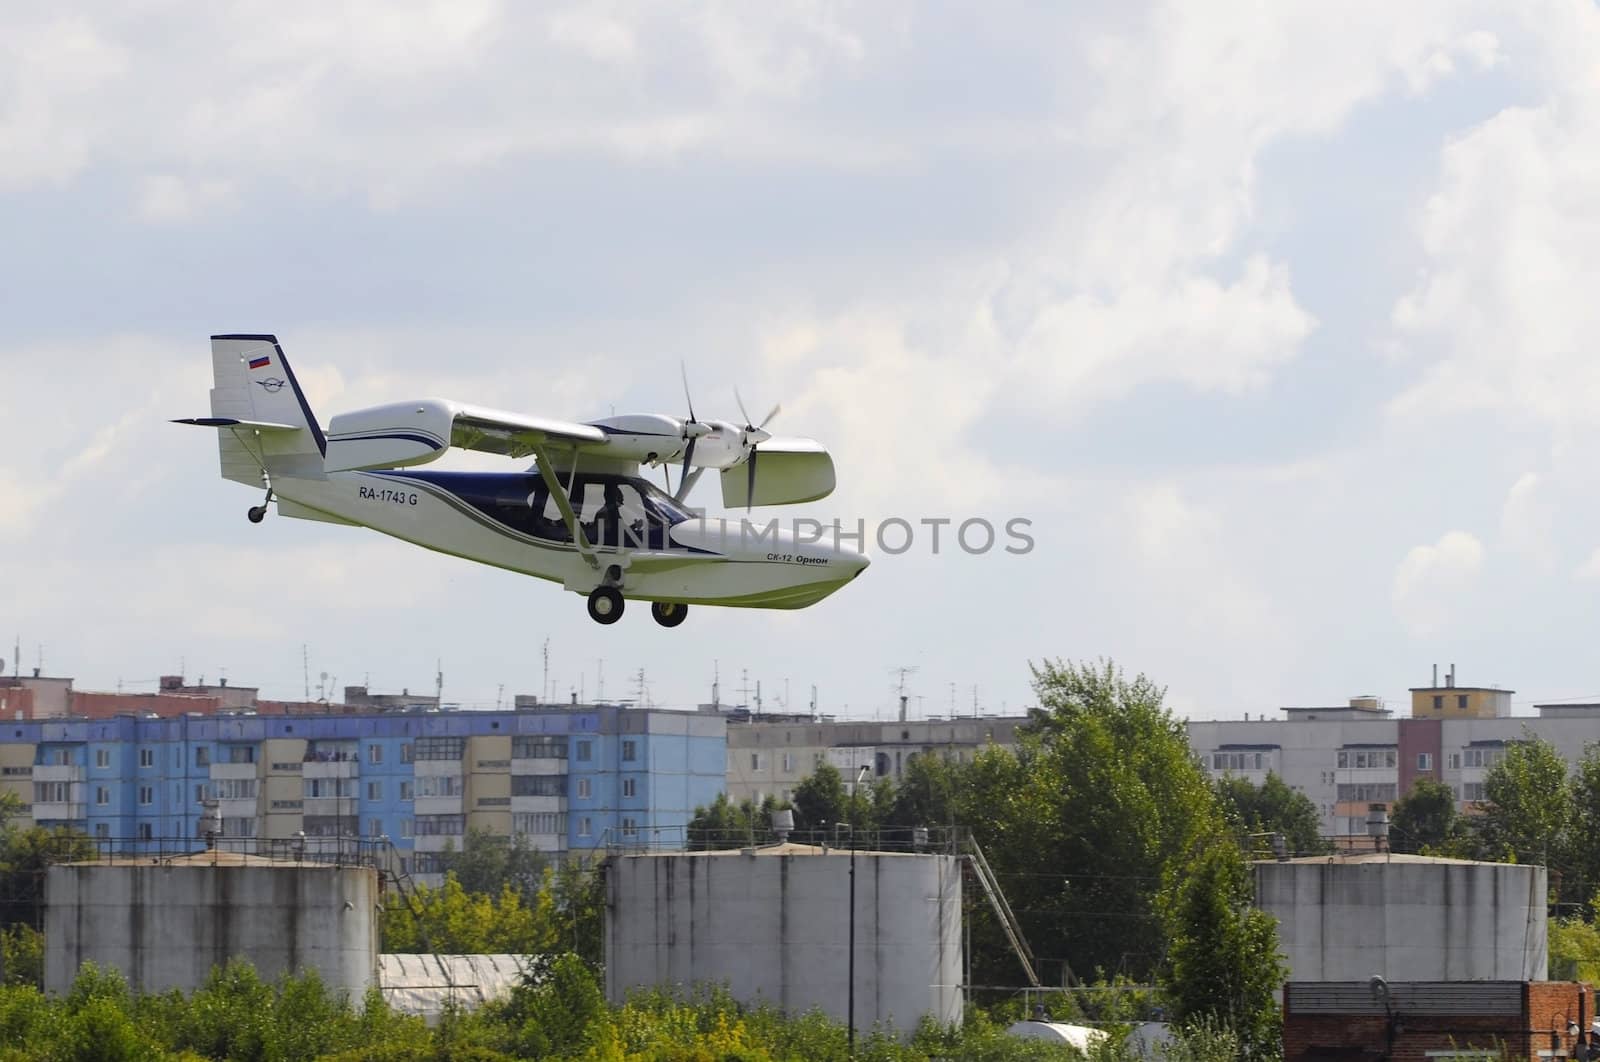 Air show "On a visit at Utair". Tyumen, Russia. 16.08.2014. Orion SK-12 amphibian